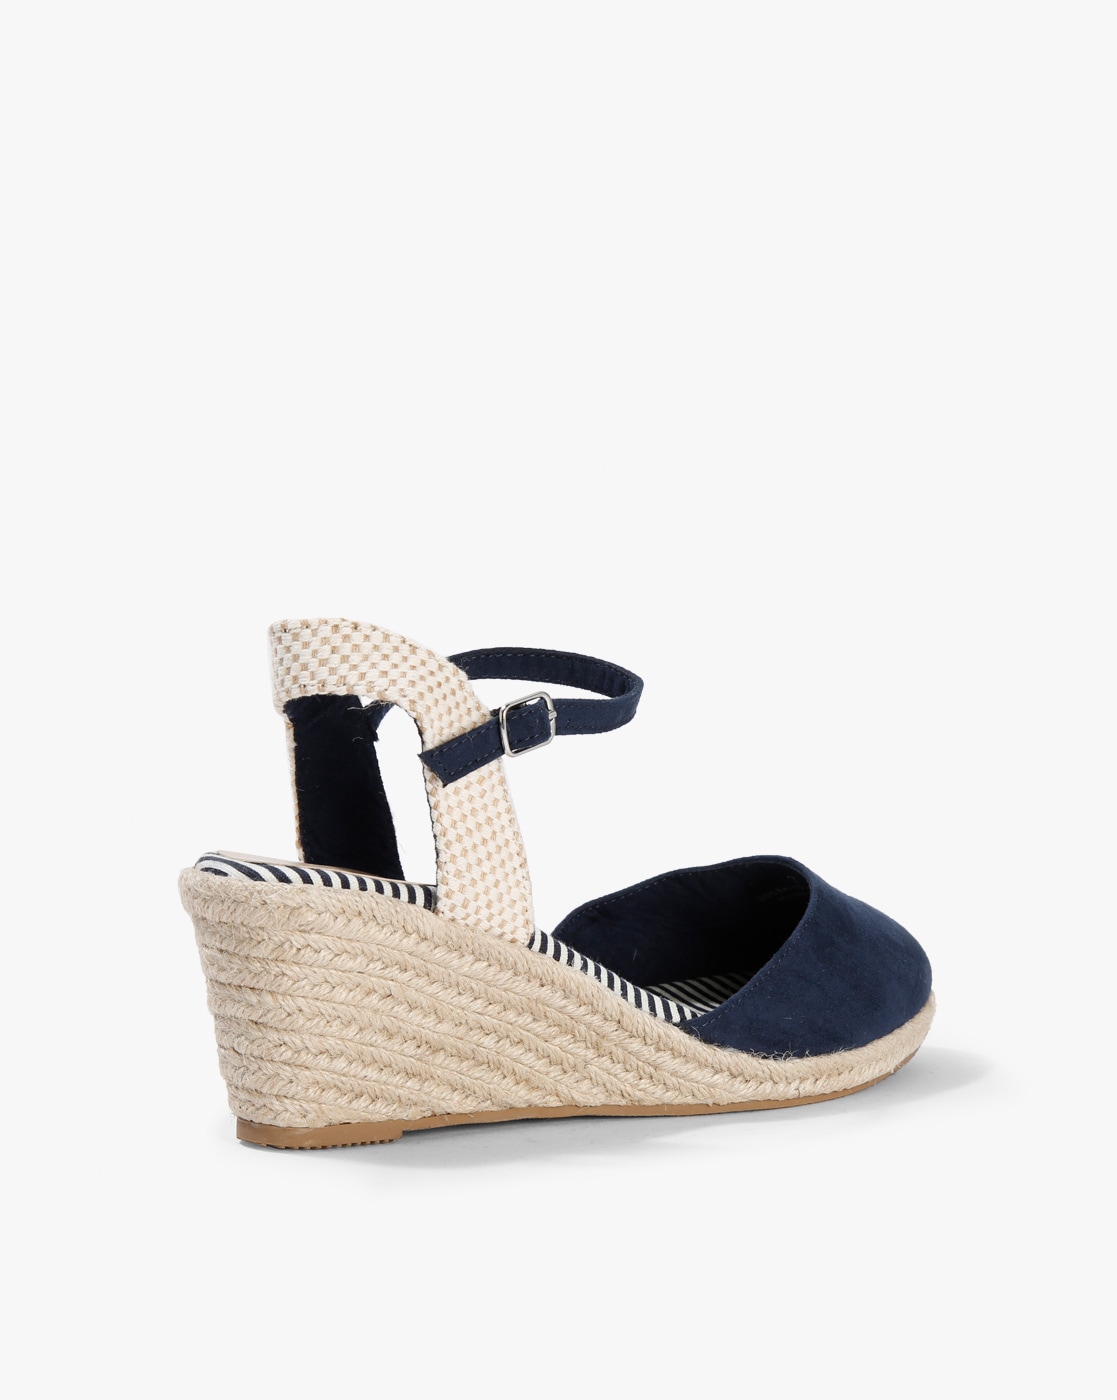 marks and spencer navy wedges